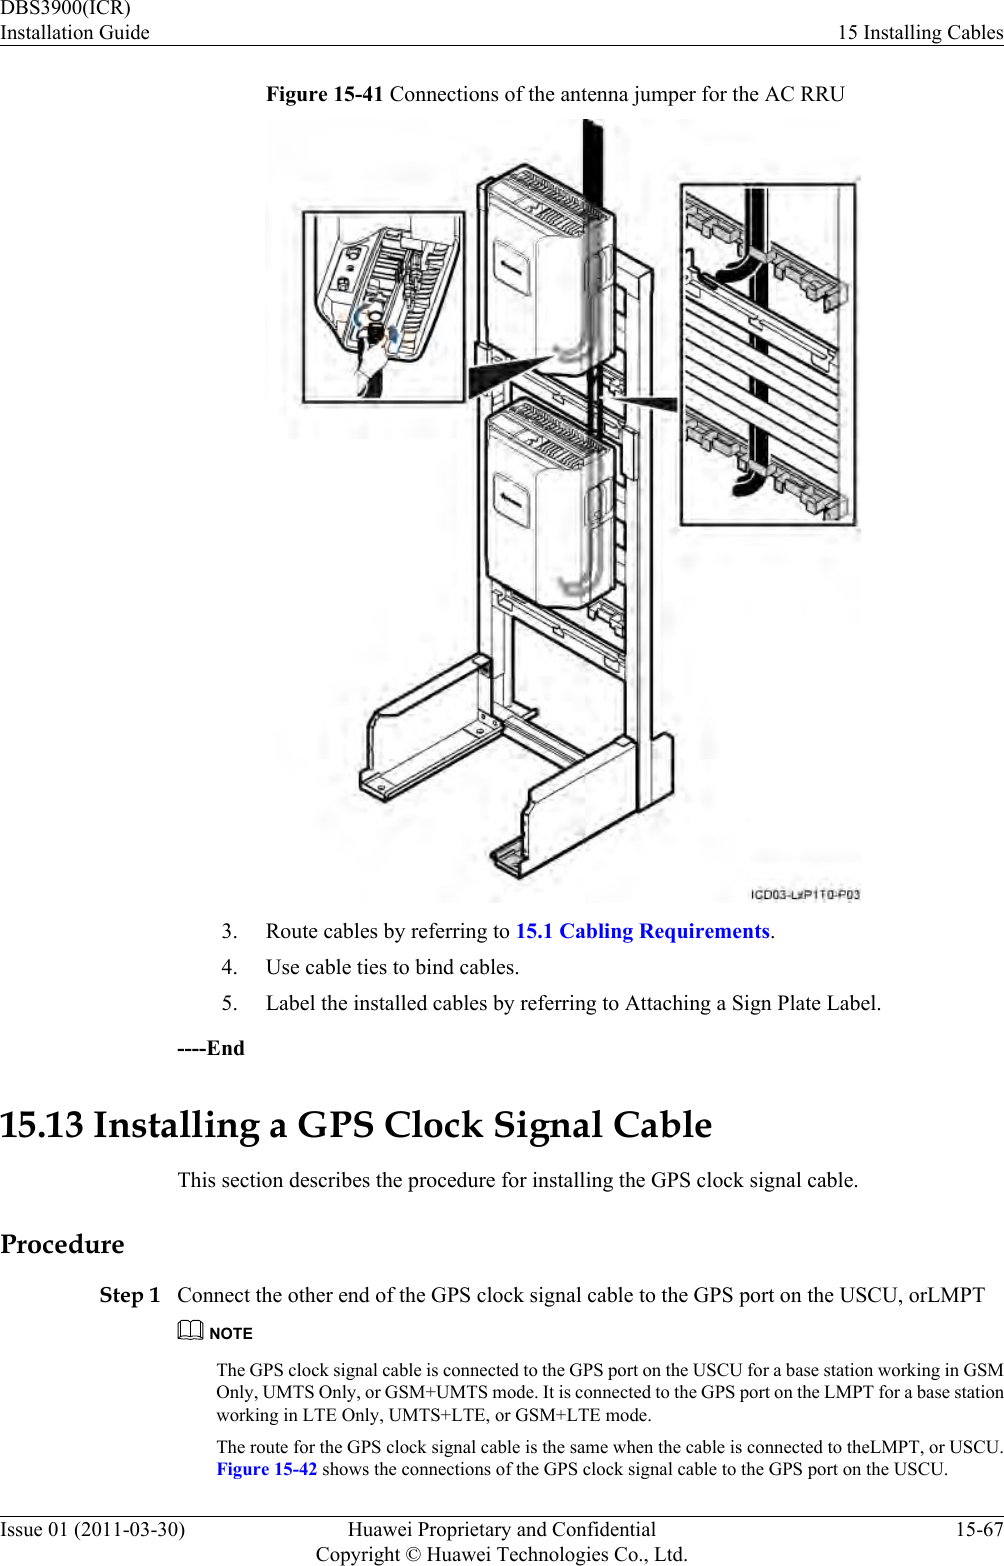 Figure 15-41 Connections of the antenna jumper for the AC RRU3. Route cables by referring to 15.1 Cabling Requirements.4. Use cable ties to bind cables.5. Label the installed cables by referring to Attaching a Sign Plate Label.----End15.13 Installing a GPS Clock Signal CableThis section describes the procedure for installing the GPS clock signal cable.ProcedureStep 1 Connect the other end of the GPS clock signal cable to the GPS port on the USCU, orLMPTNOTEThe GPS clock signal cable is connected to the GPS port on the USCU for a base station working in GSMOnly, UMTS Only, or GSM+UMTS mode. It is connected to the GPS port on the LMPT for a base stationworking in LTE Only, UMTS+LTE, or GSM+LTE mode.The route for the GPS clock signal cable is the same when the cable is connected to theLMPT, or USCU.Figure 15-42 shows the connections of the GPS clock signal cable to the GPS port on the USCU.DBS3900(ICR)Installation Guide 15 Installing CablesIssue 01 (2011-03-30) Huawei Proprietary and ConfidentialCopyright © Huawei Technologies Co., Ltd.15-67